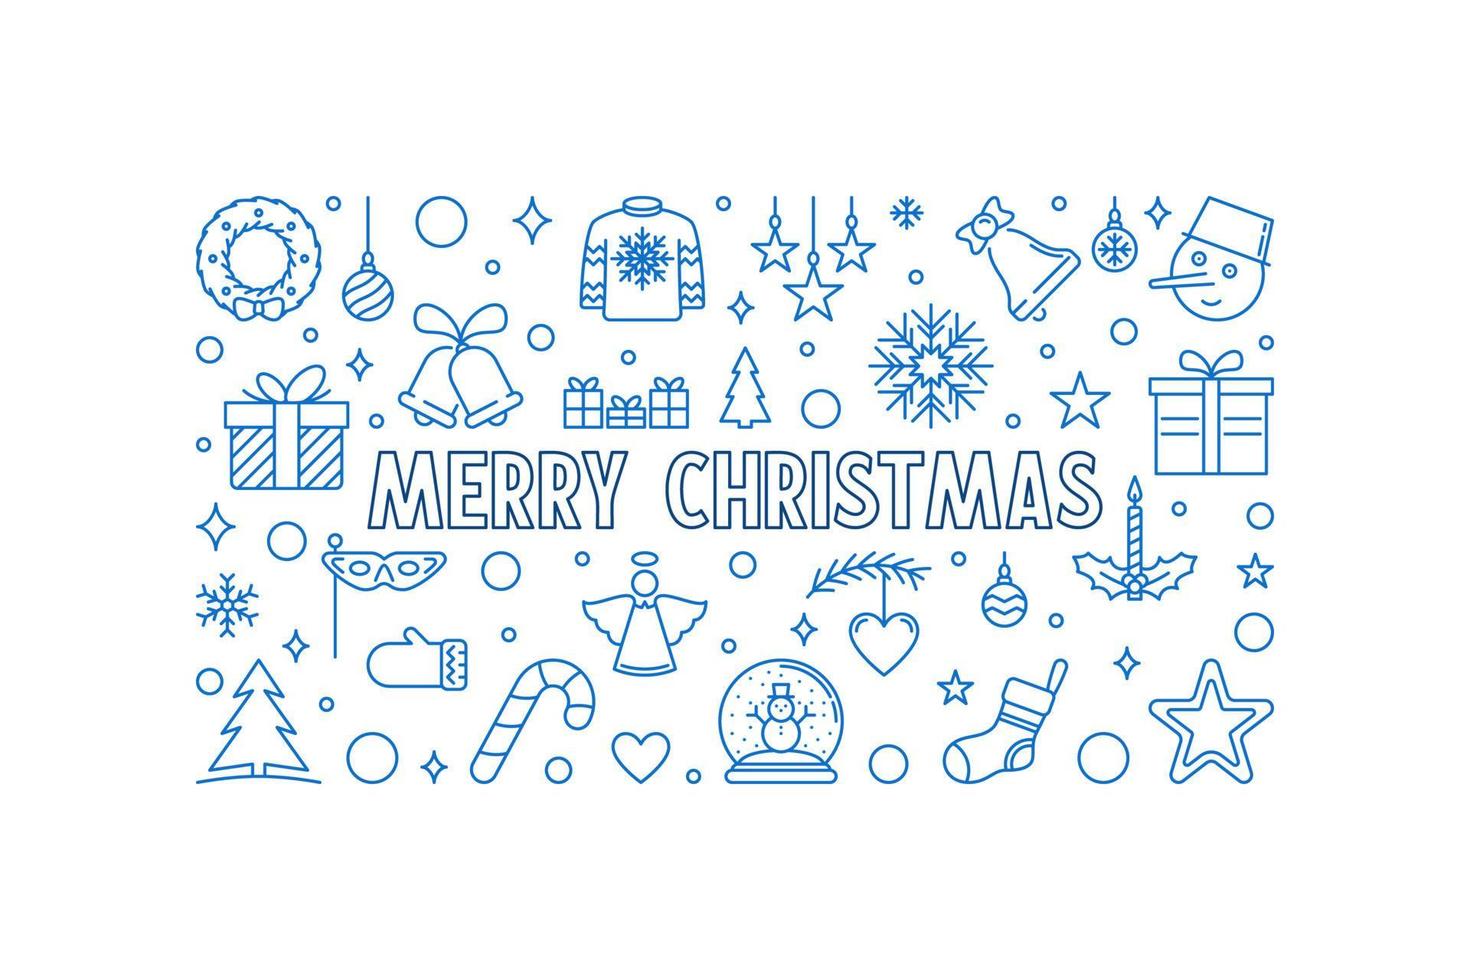 Merry Christmas Banner with modern blue outline design vector